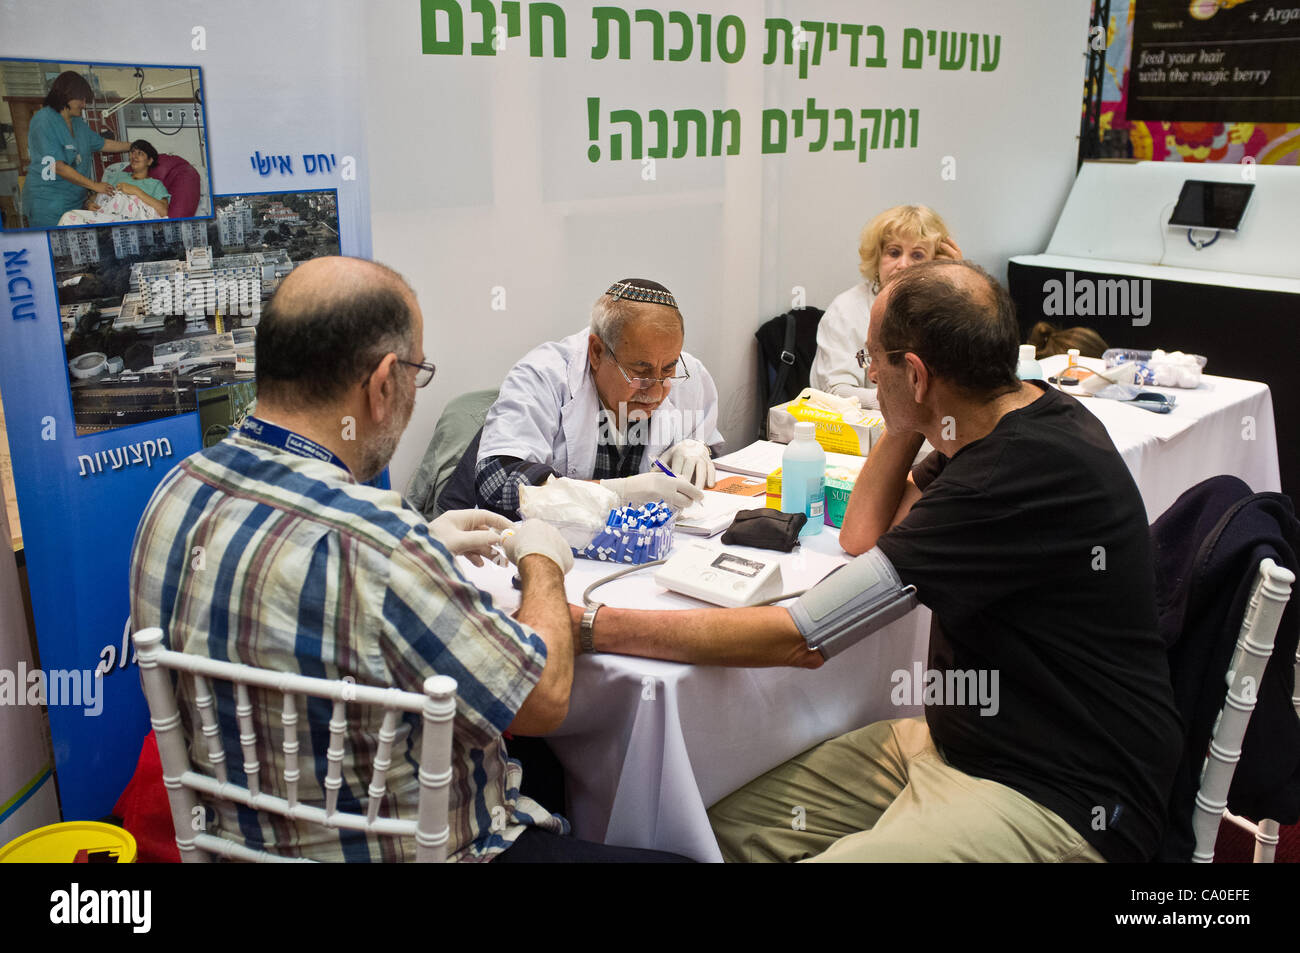 Visitors at the Jerusalem Marathon Expo undergo free Glaucoma tests at the International Congress Center. Expo deals with sports, fitness, health and beauty and will run for three days leading up to the marathon this Friday (March 16th). Jerusalem, Israel. 13-Mar-2012. Stock Photo